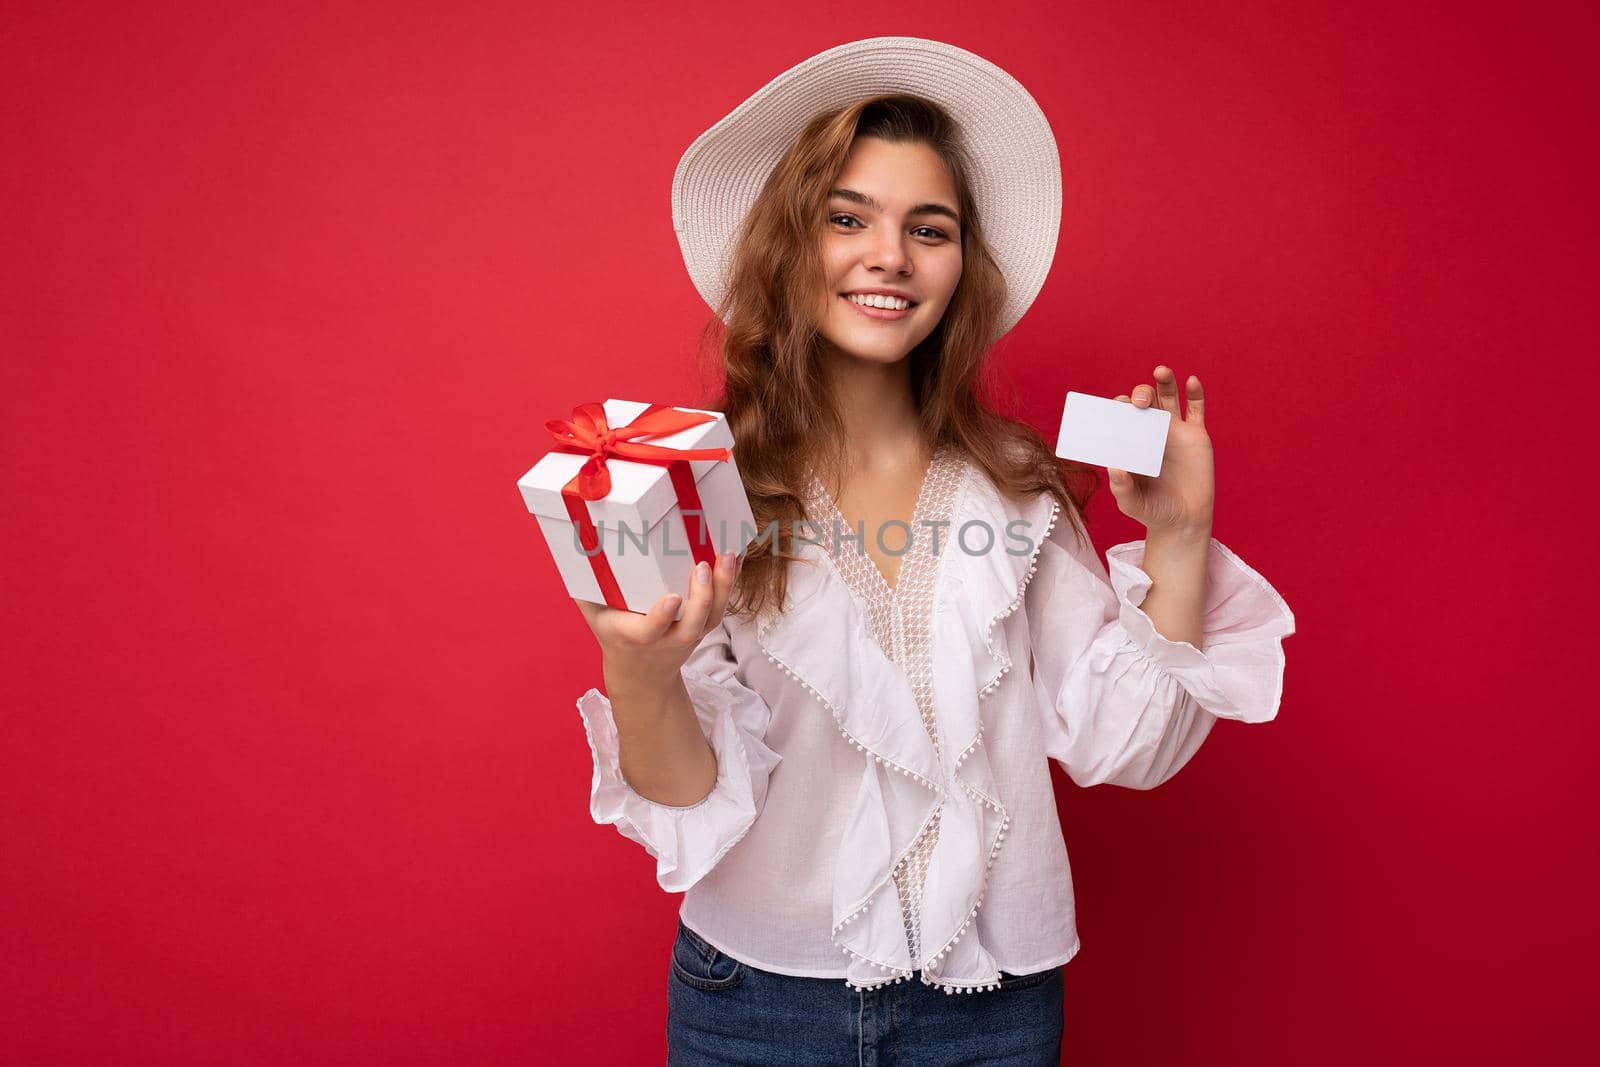 Portrait of positive cheerful fashionable woman in formalwear holding gift box and credit card looking at camera isolated on red background with copy space.